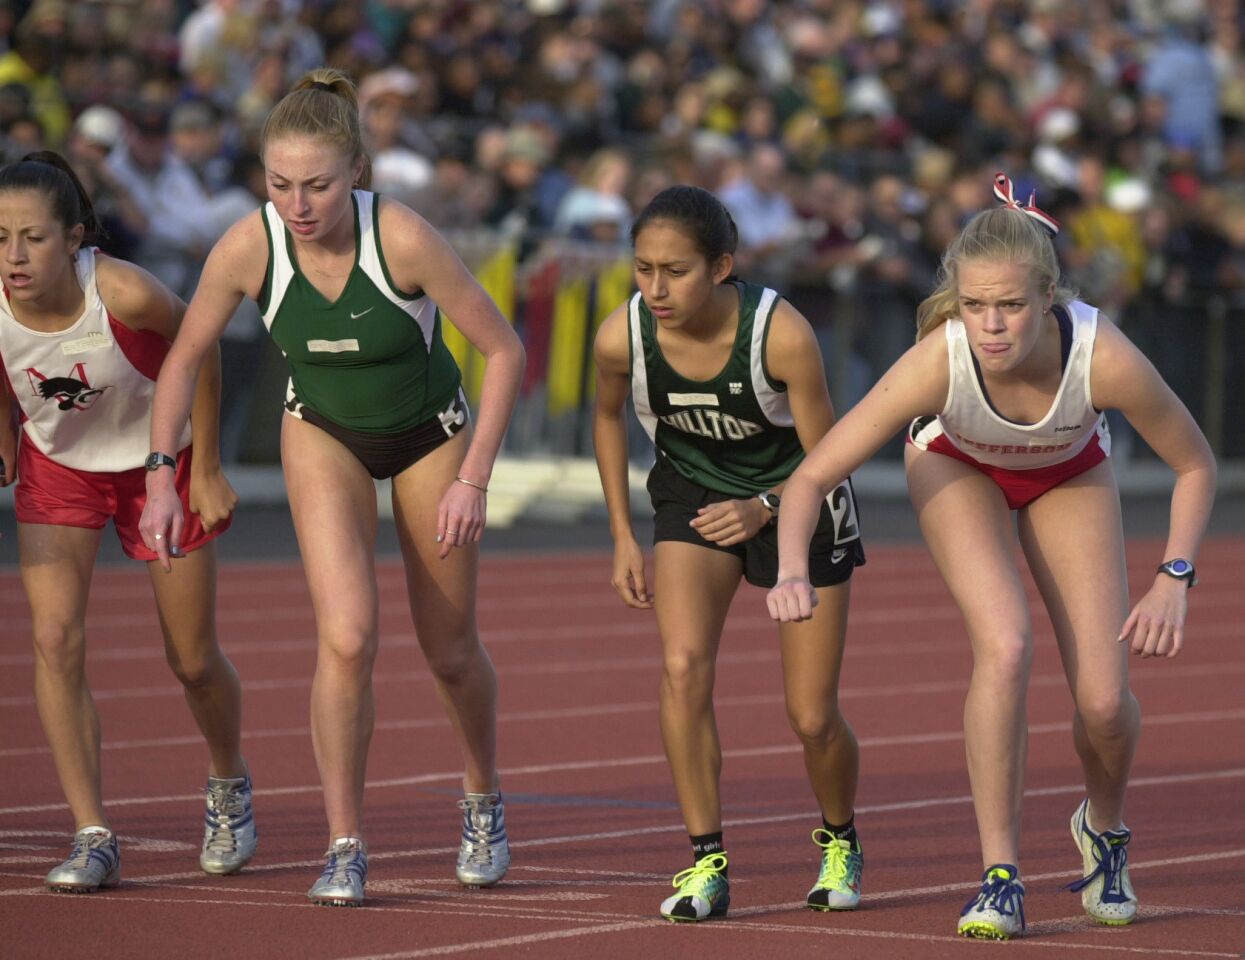 Hilltop's Desiree Davila (center) glances at her competion as Clara Horowitz (left) from Oakland, Ca., and Kelley Otstott from Thomas Jefferson High School prepare for the start of the Women's 1600 meter race at the Arcadia Invitational track meet April 14, 2001.